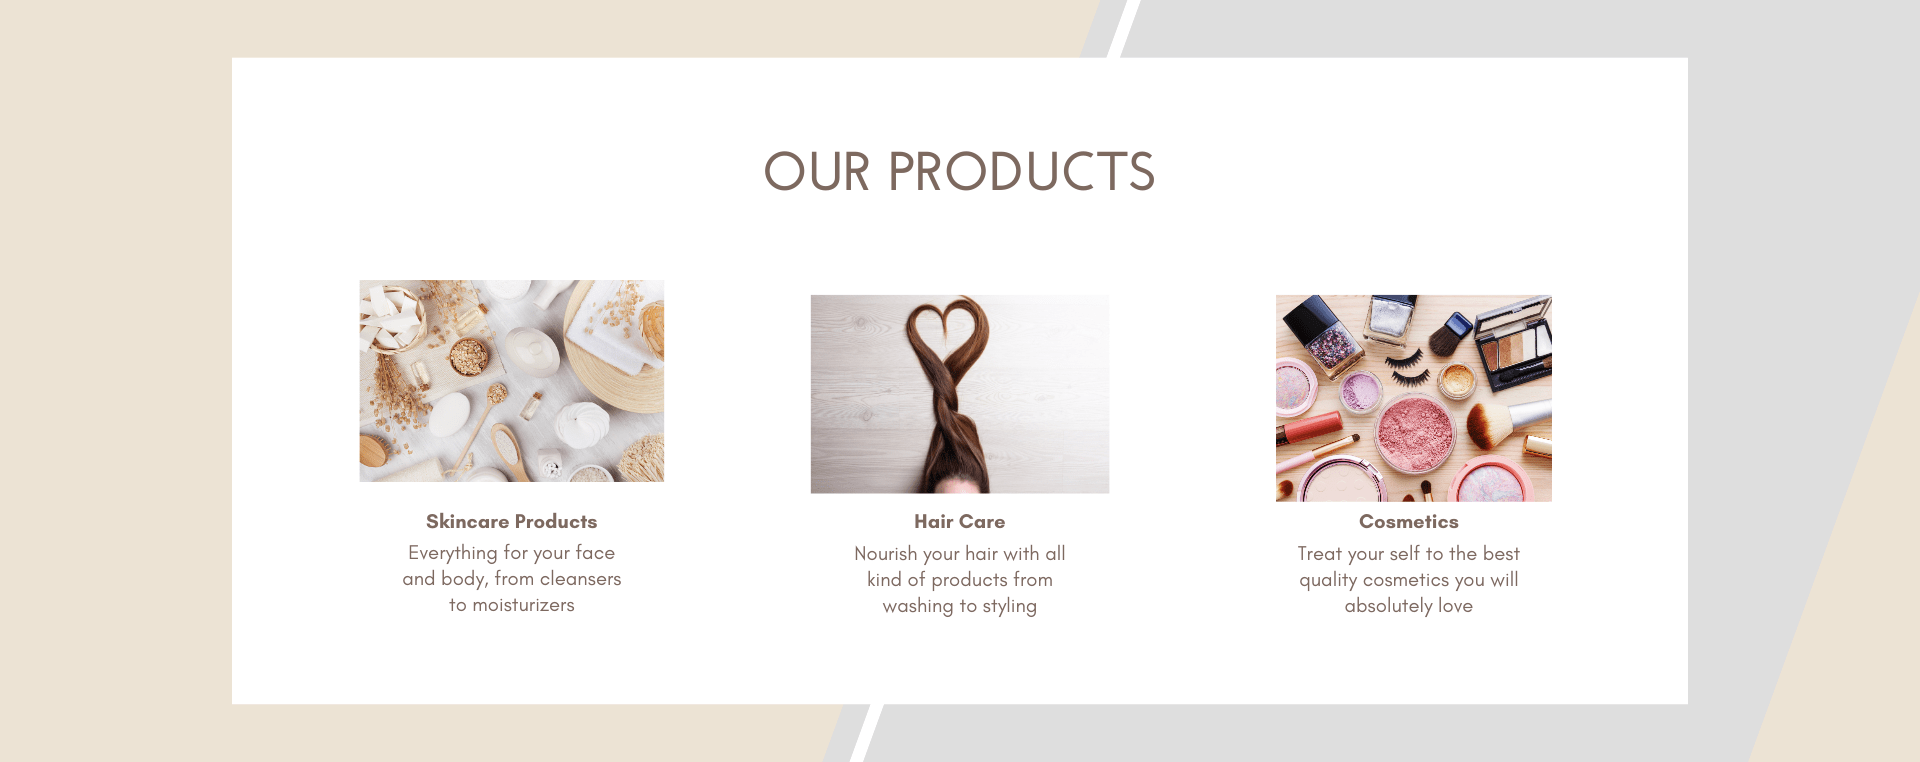 Online Store for Skincare and Hair Products